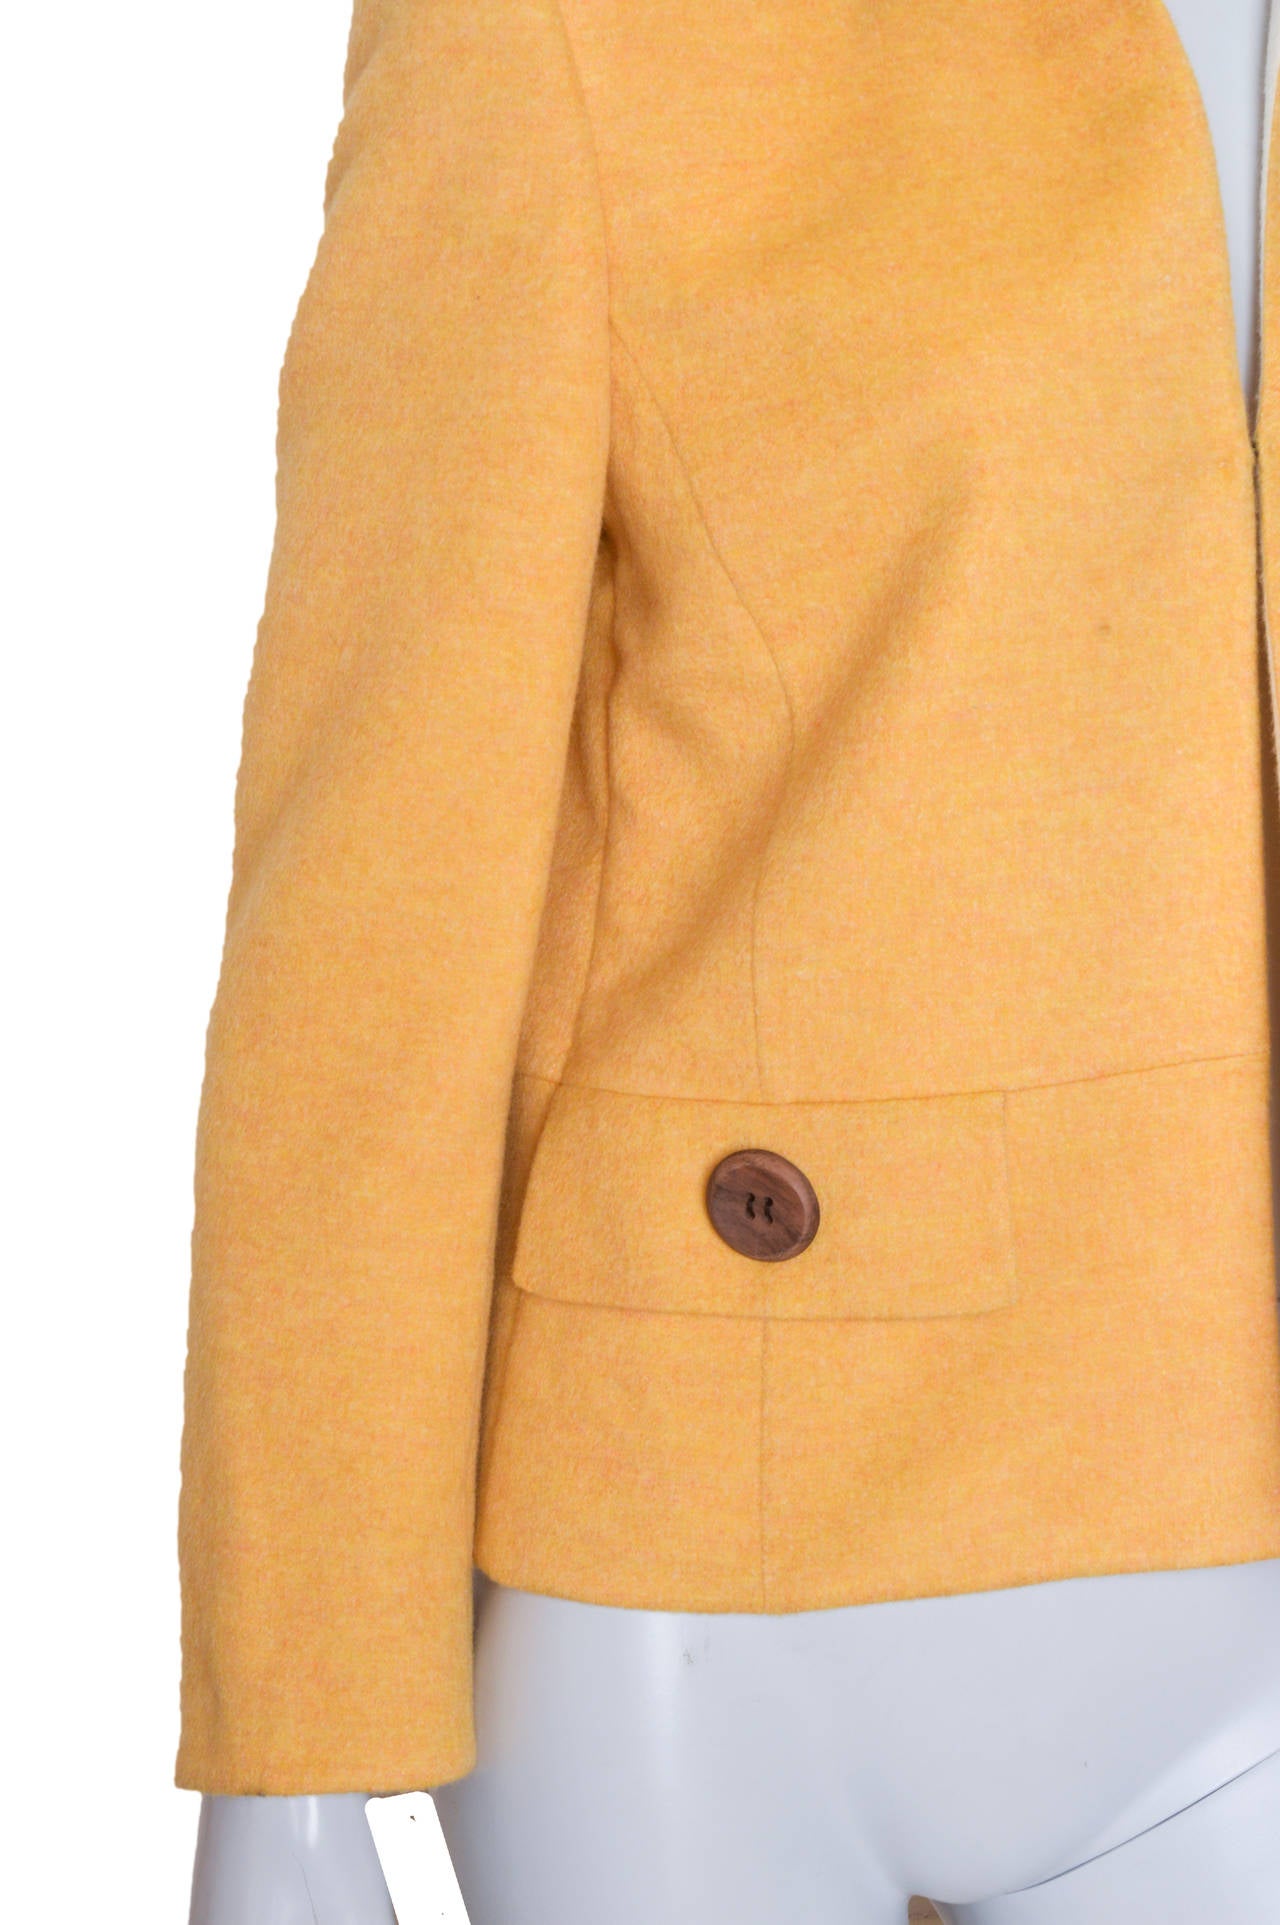 Luxurious Akris cashmere fitted jacket/blazer.
One hook eye closure at waist.
Wood button flap pockets.
Contrast color stand up collar.